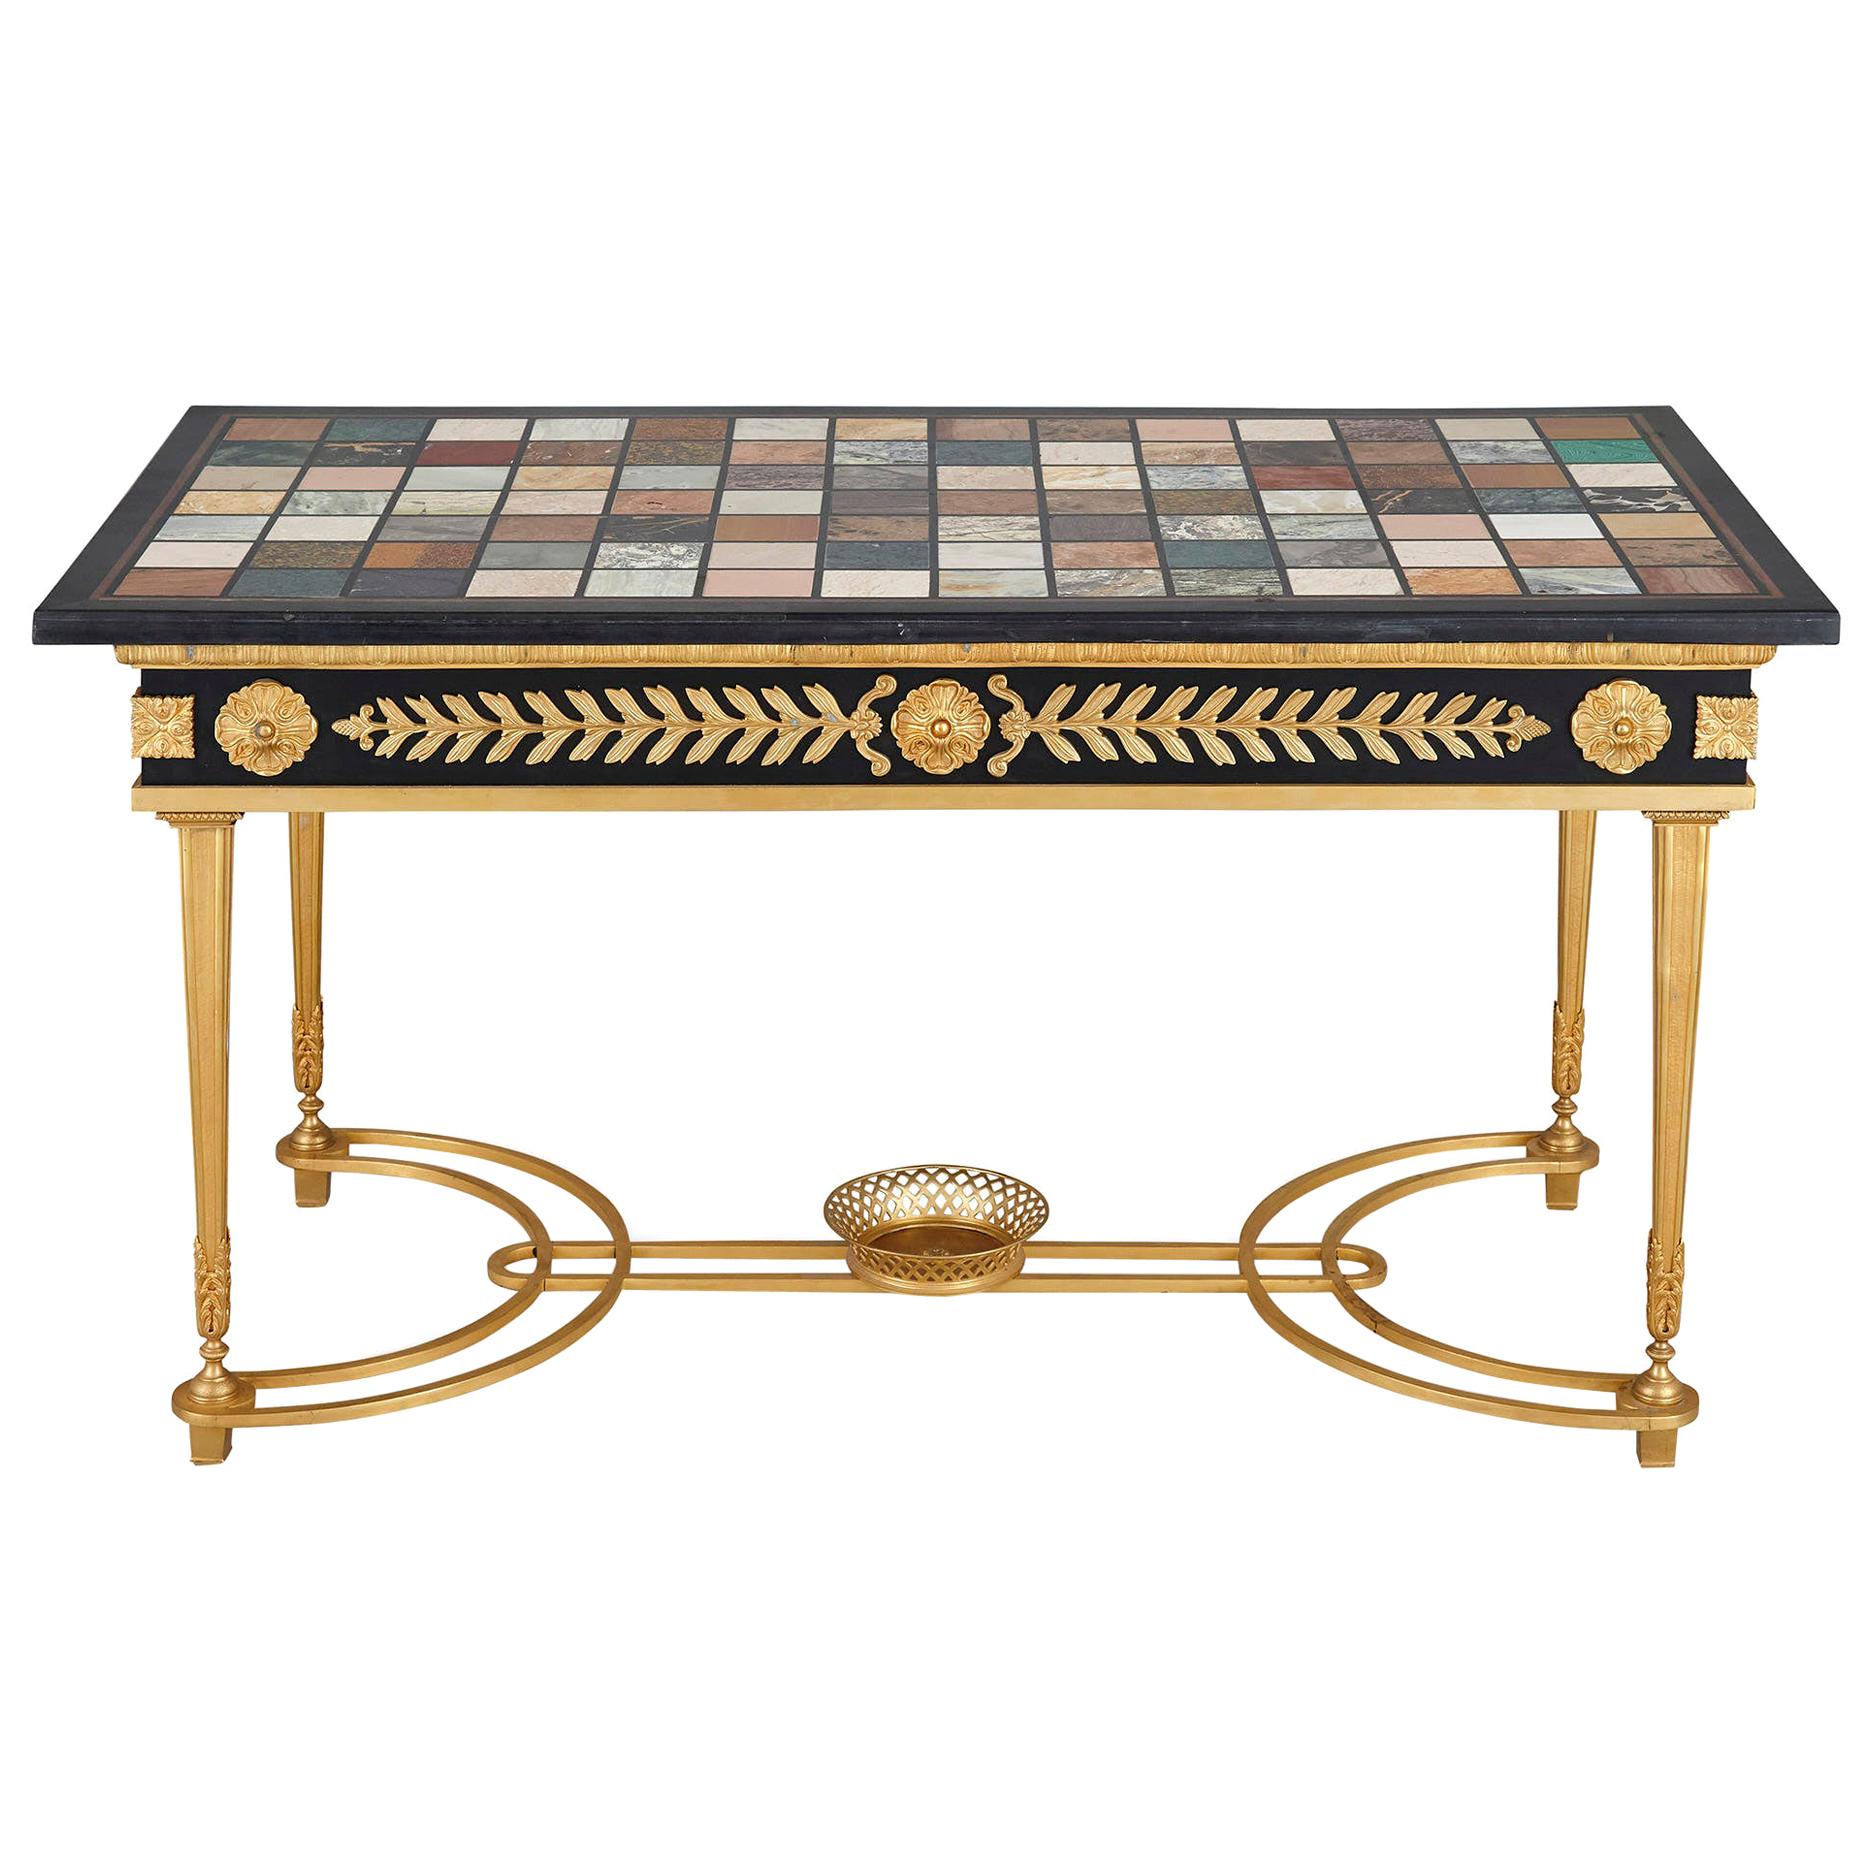 Neoclassical Style Coffee Table with Italian Marble Specimen Top